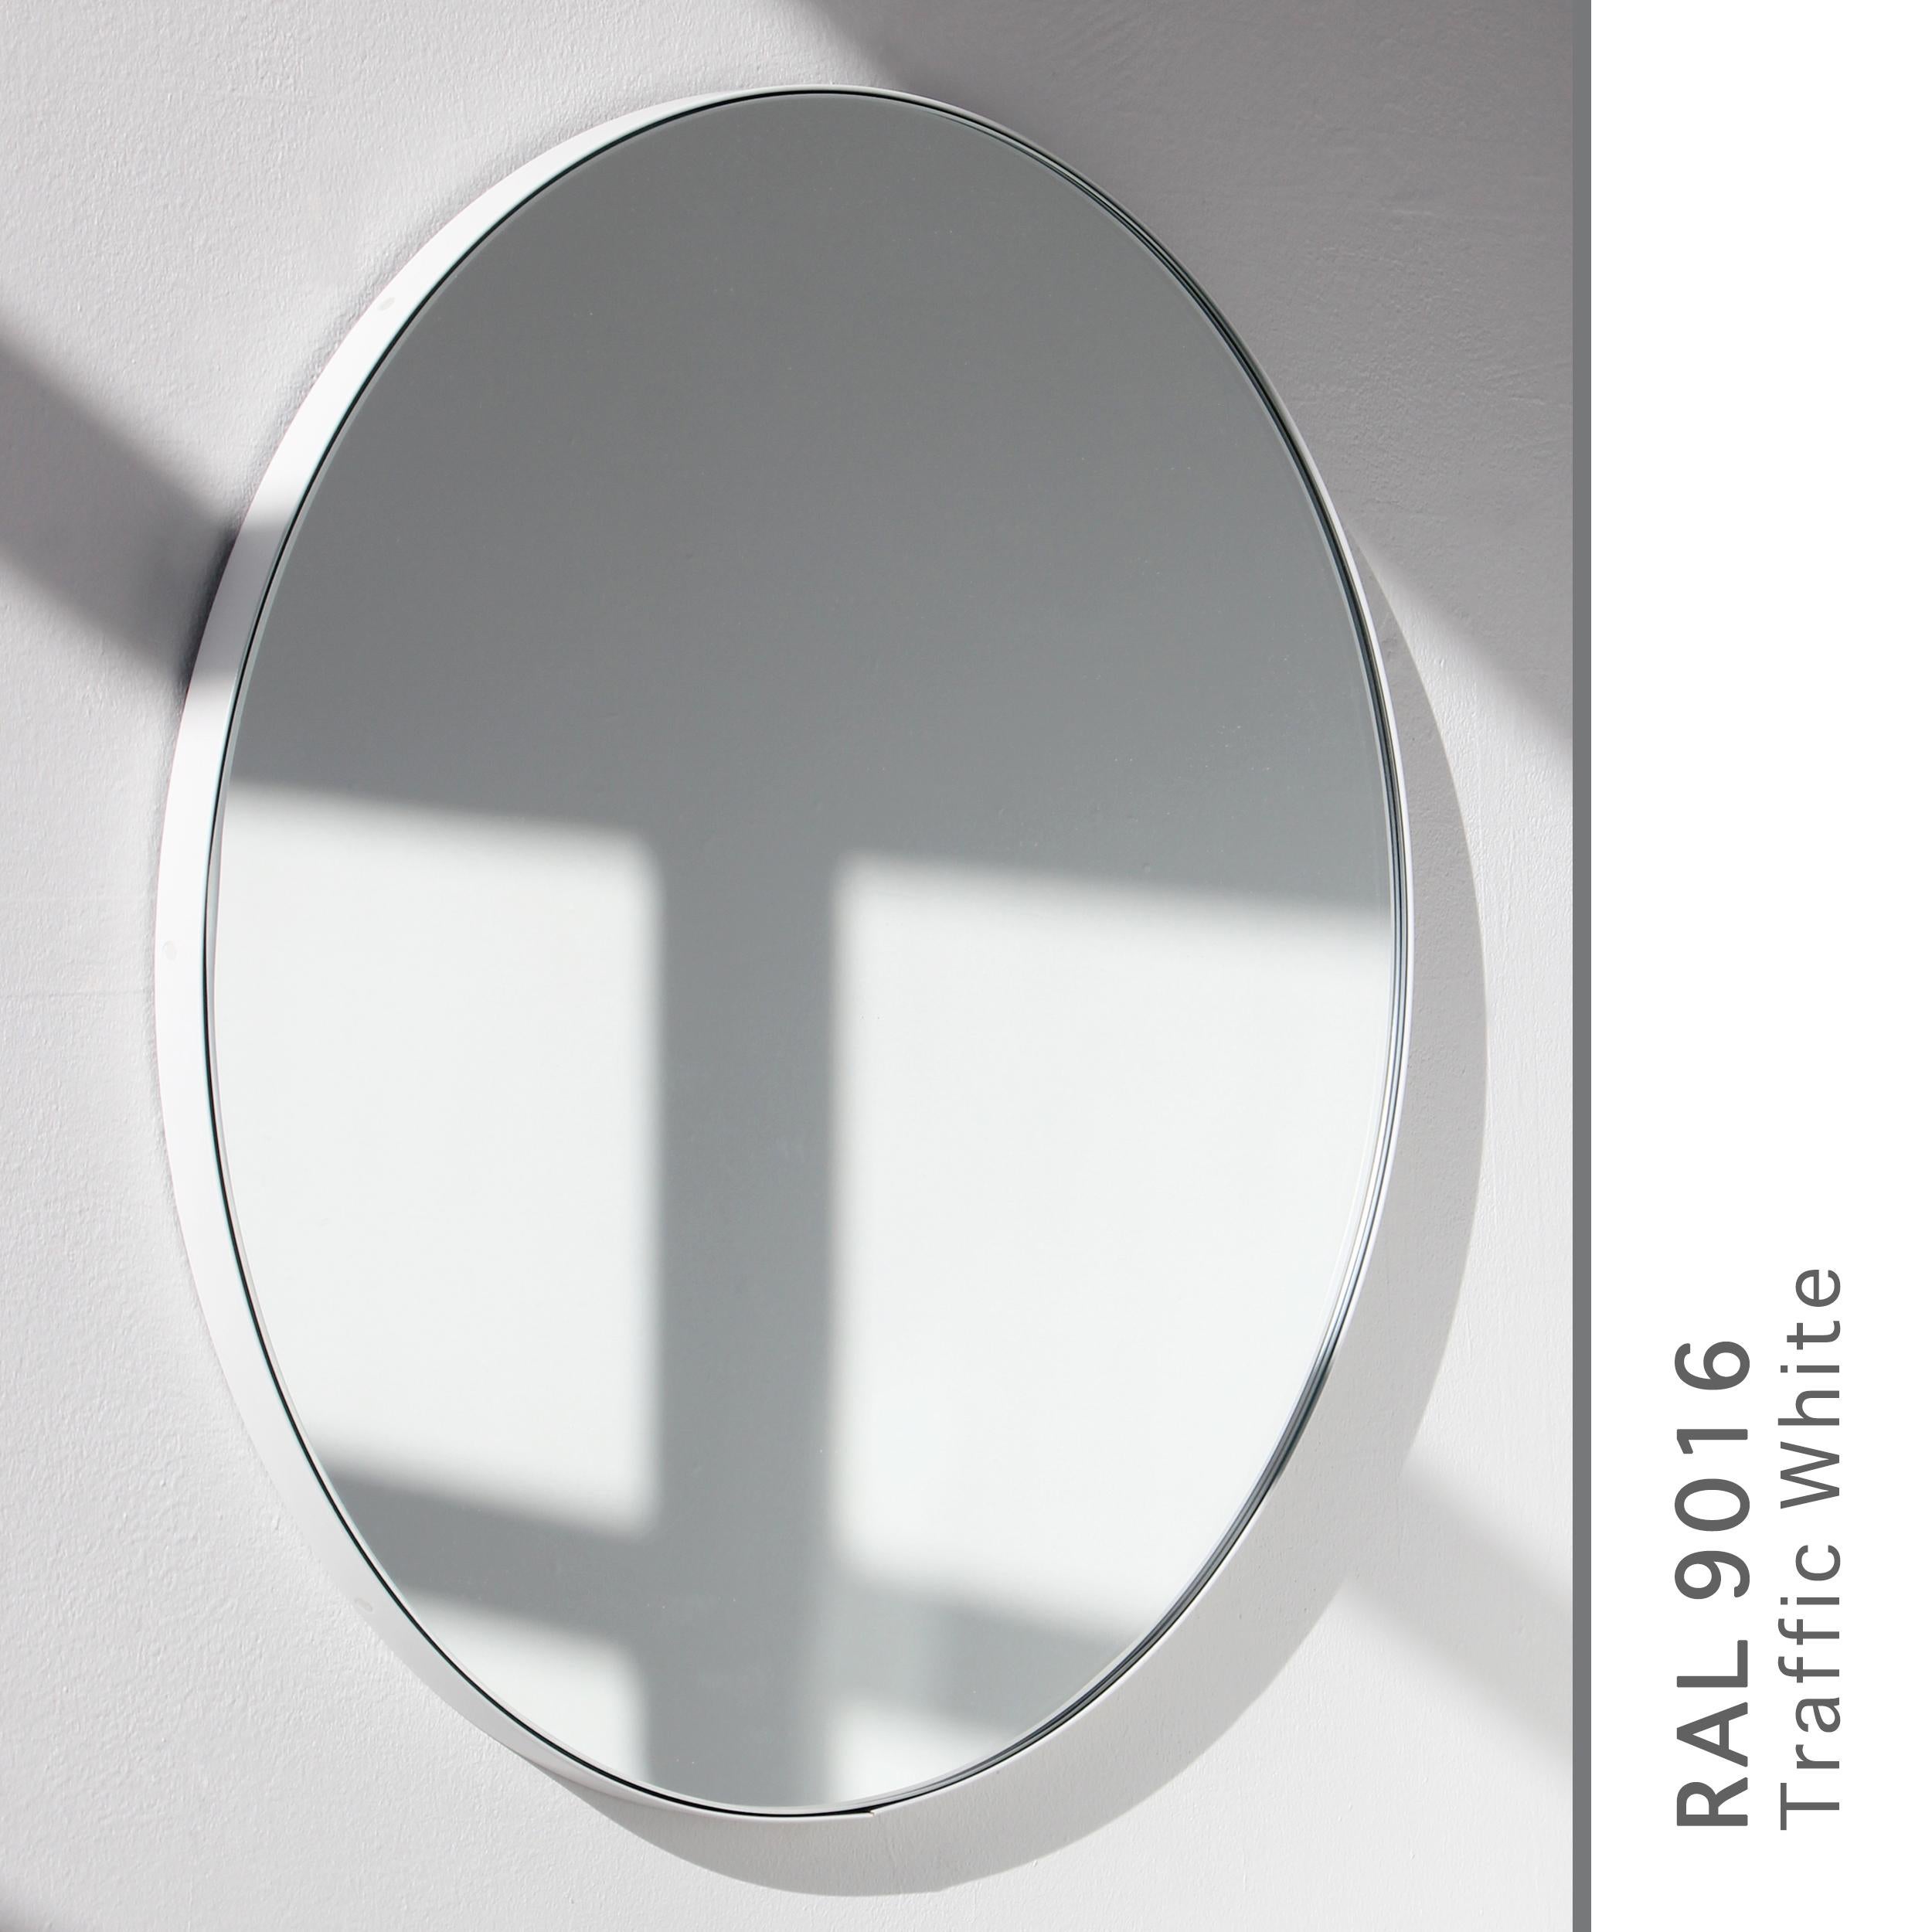 Orbis Round Handcrafted Modern Mirror with White Frame, Regular In New Condition For Sale In London, GB